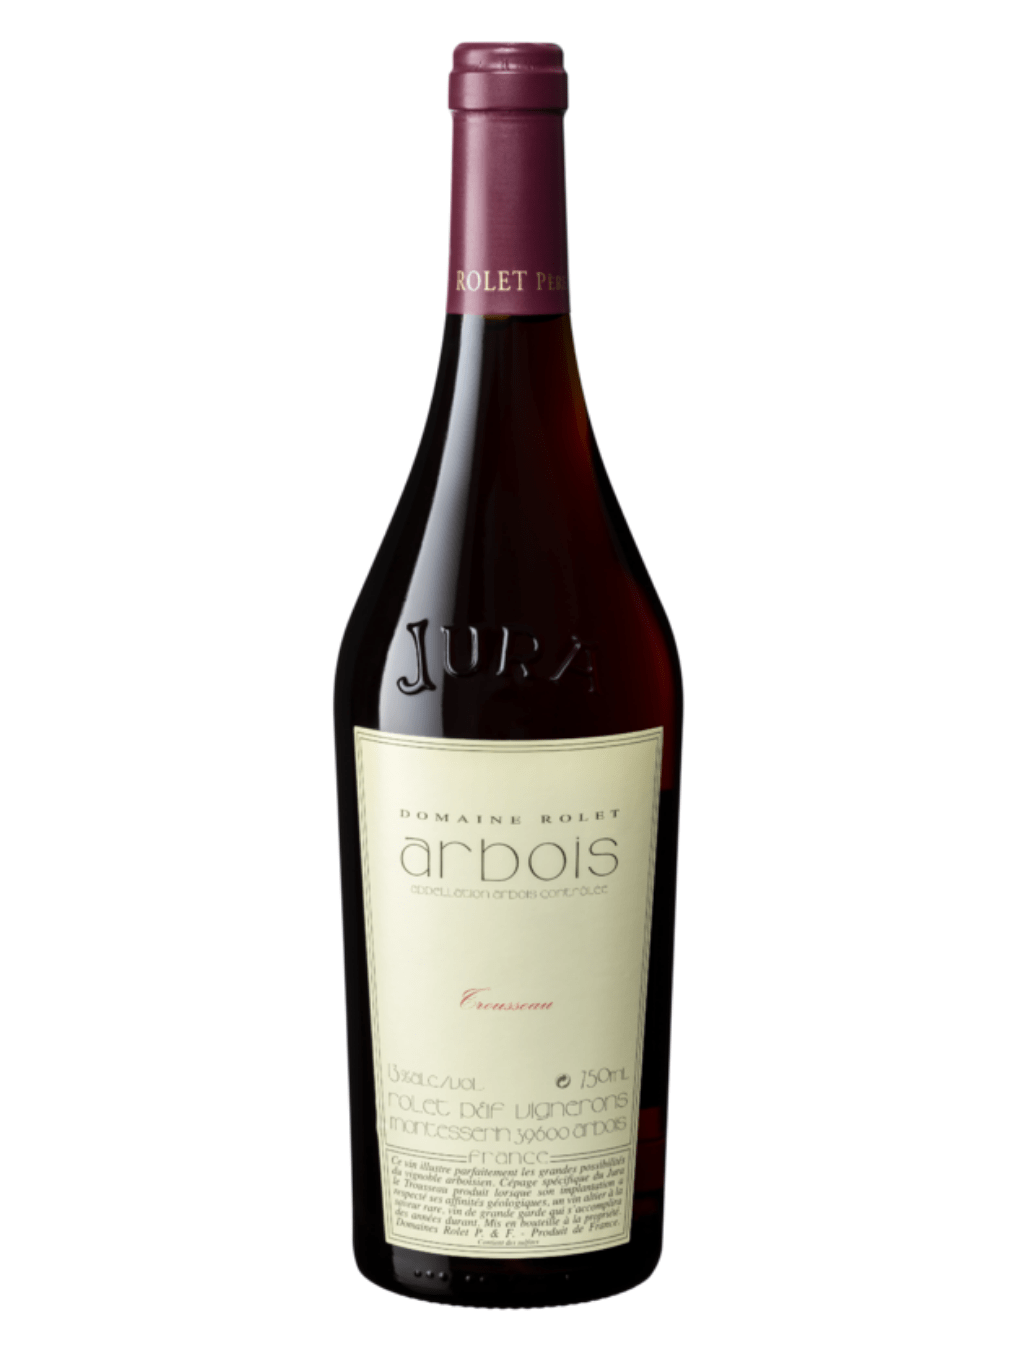 Shop Domaine Rolet Domaine Rolet Arbois Trousseau 1988 online at PENTICTON artisanal French wine store in Hong Kong. Discover other French wines, promotions, workshops and featured offers at pentictonpacific.com 